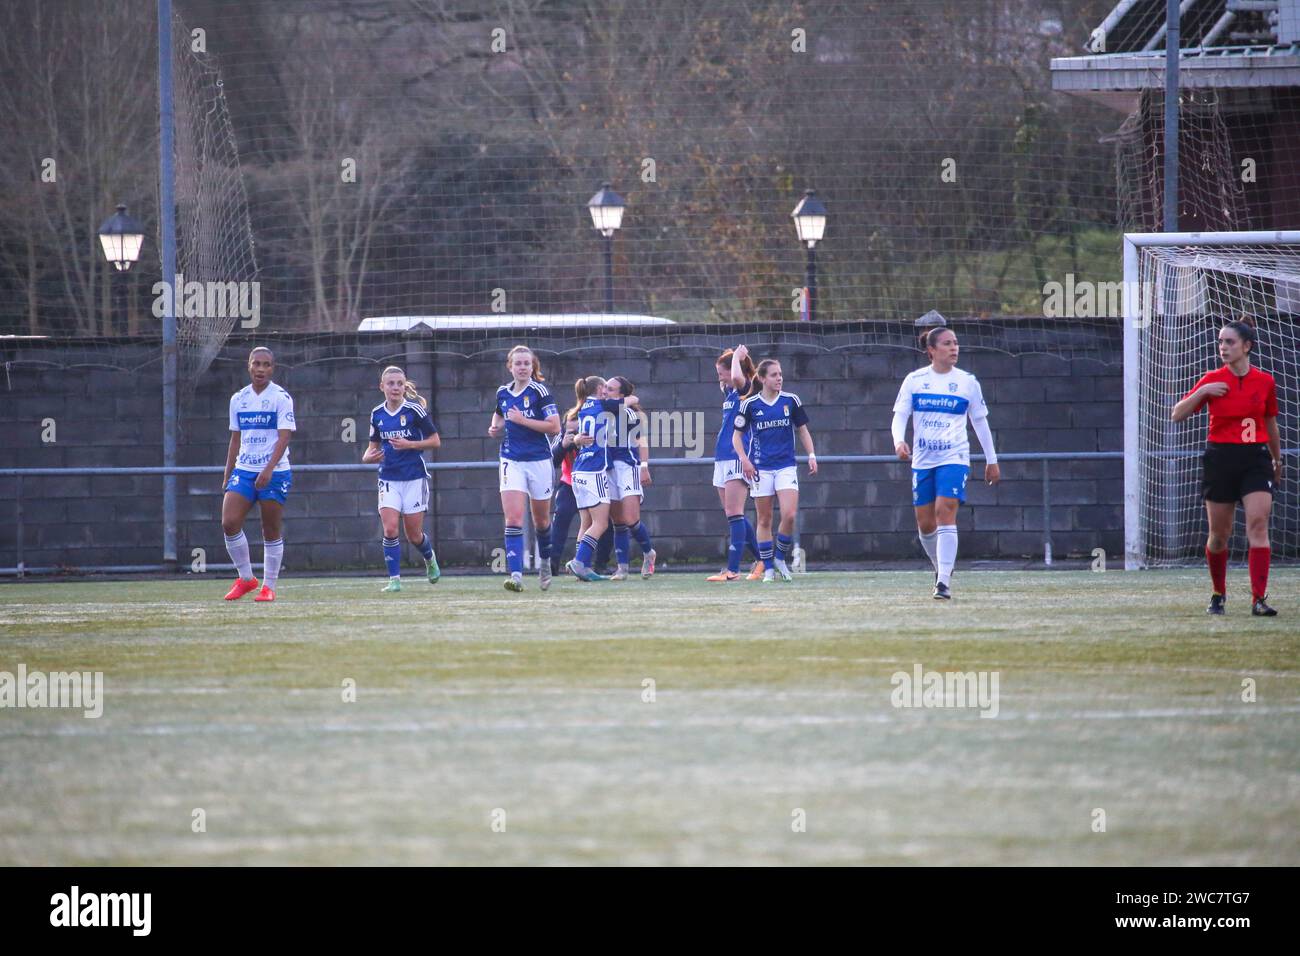 San Claudio, Spain, 14th January, 2024: Real Oviedo Fem players celebrate the tying goal during the round of 16 of the SM La Reina Cup 2023-24 between Real Oviedo Fem and UDG Tenerife, on January 14 2024, at the 'El Castañeo' Sports Complex, in San Claudio, Spain. Credit: Alberto Brevers / Alamy Live News. Stock Photo